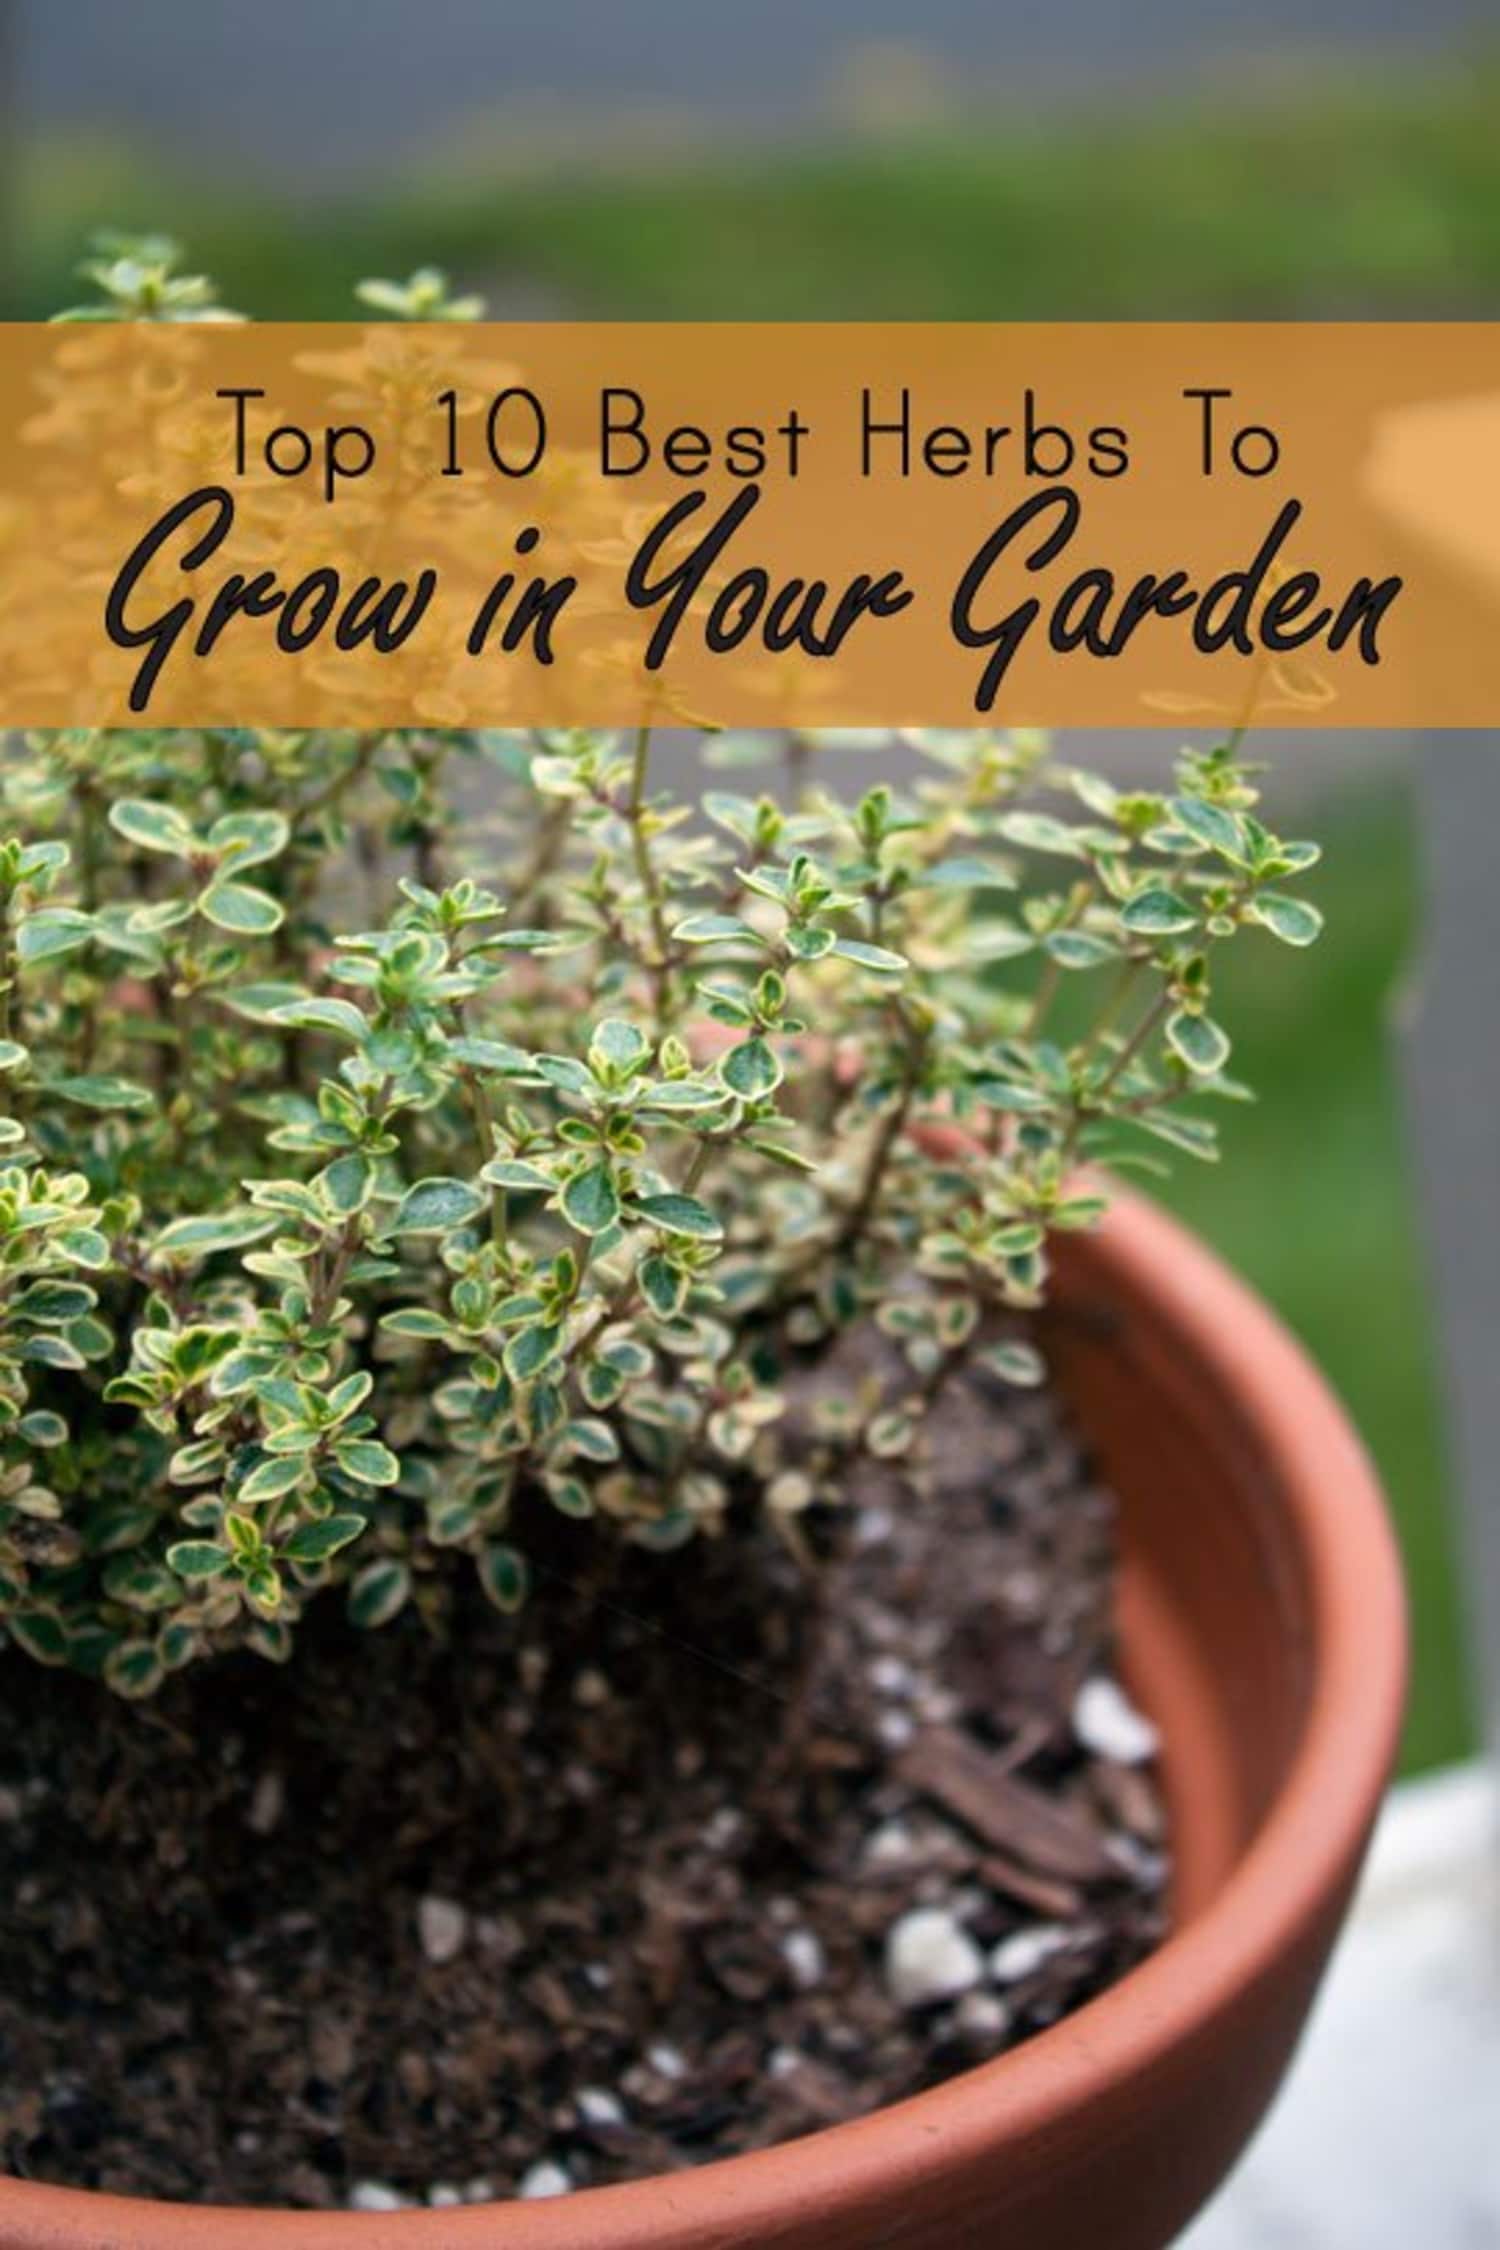 Top 10 Best & Easiest Herbs to Grow in Your Garden (And How to Use Them